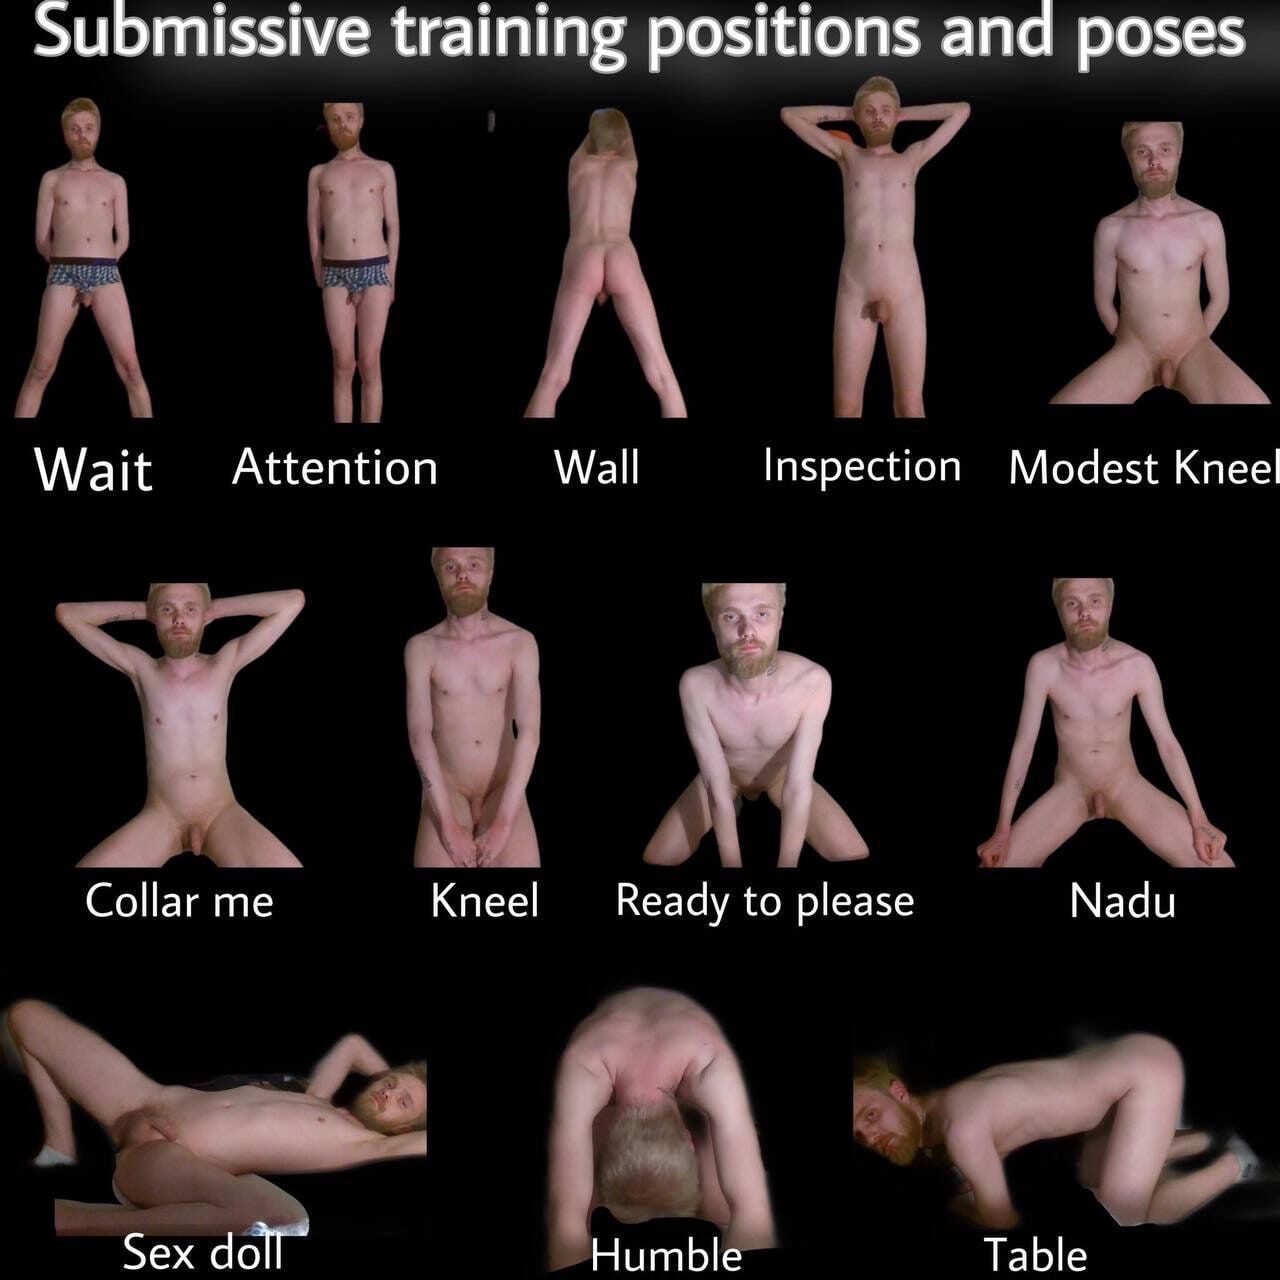 Domelook Voyeur's sub Submissive  Training Positions #19